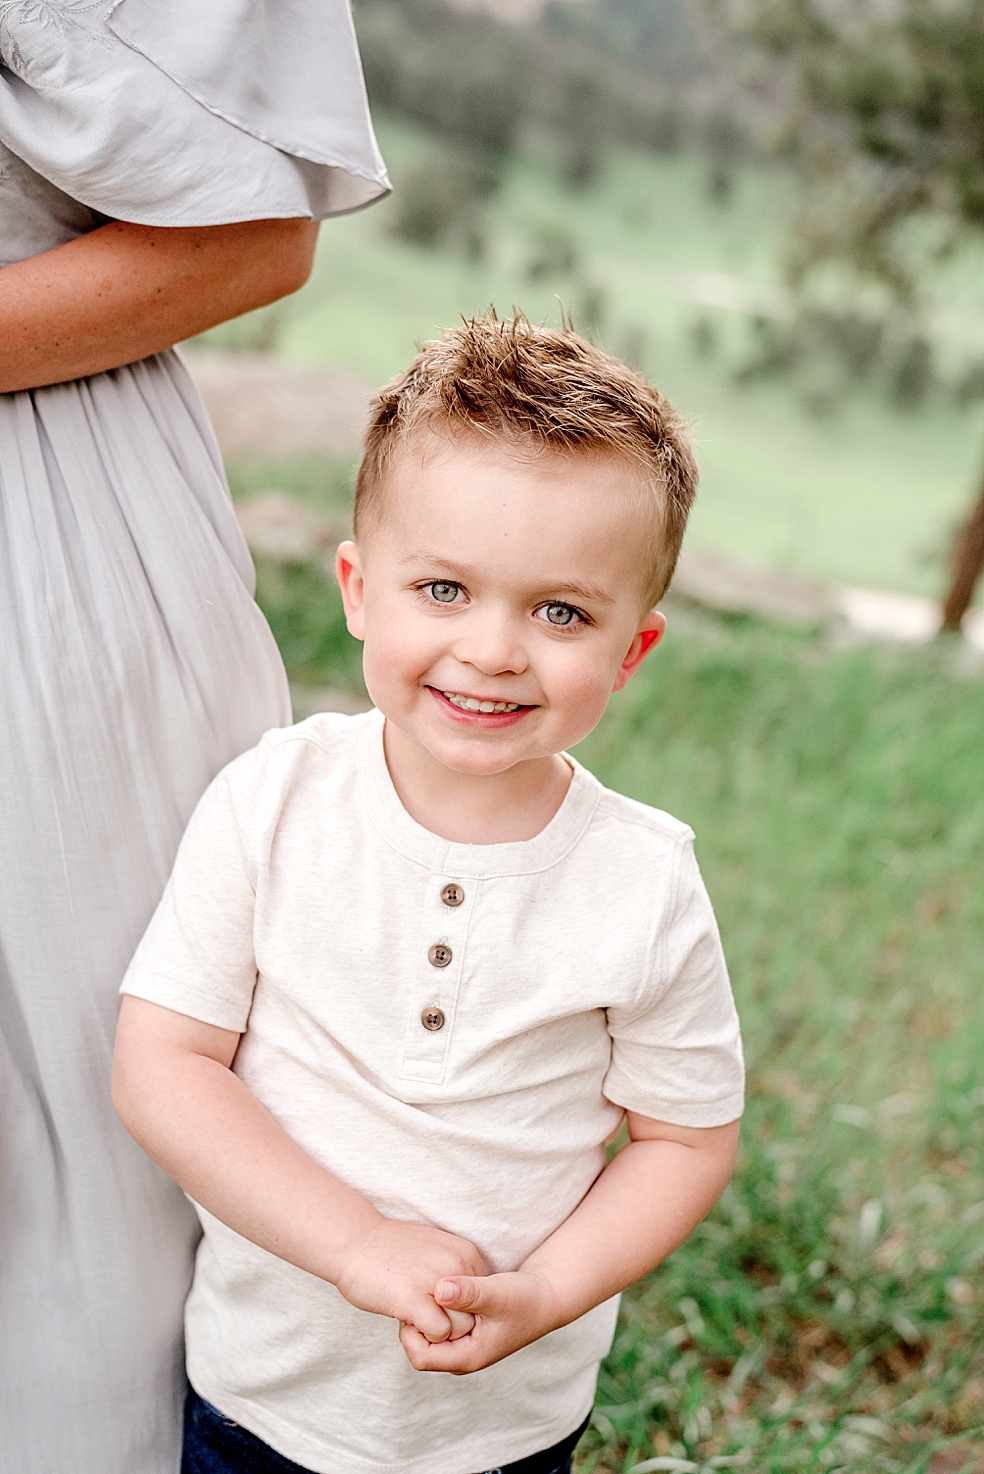 Little boy in cream shirt smiling | Photo by Decatur Alabama Family Photographer Jessica Lee